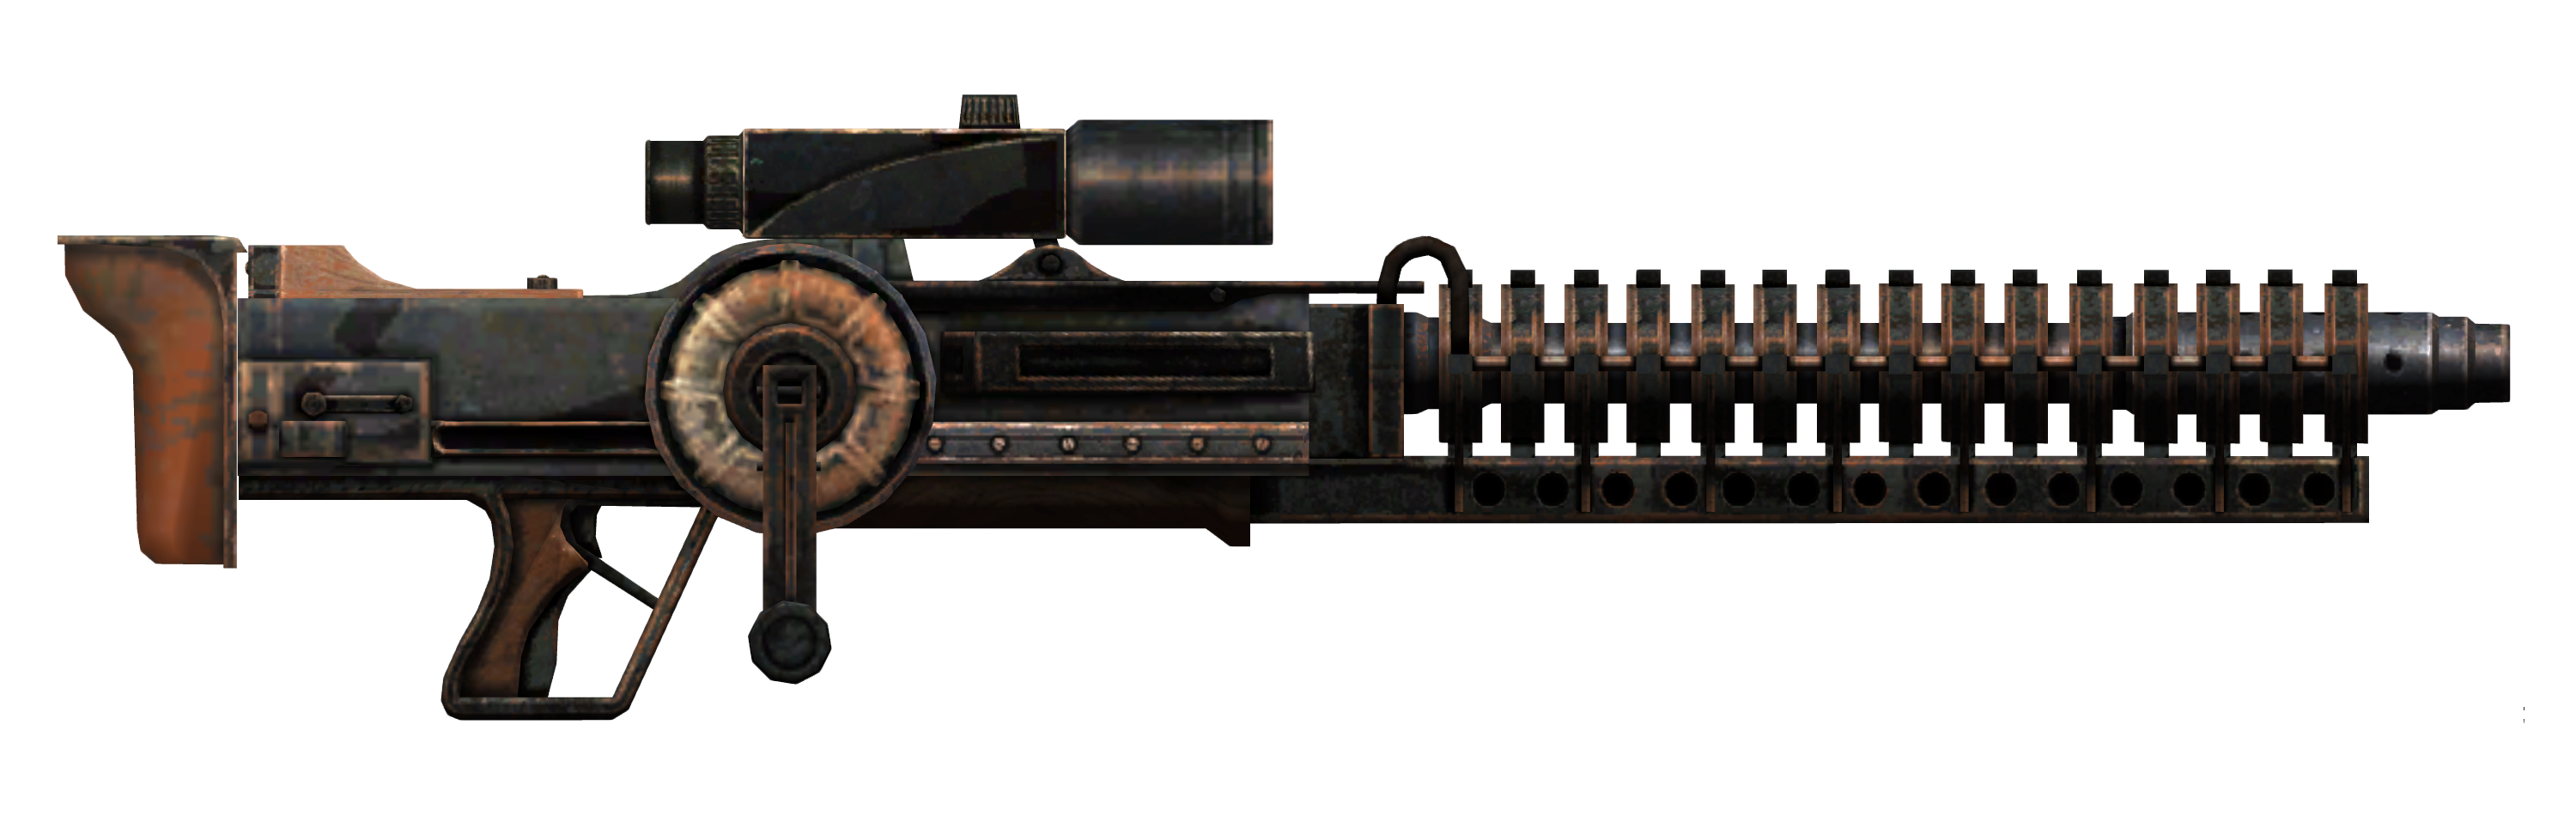 The unique gauss rifle (YCS/186) for Fallout: New Vegas